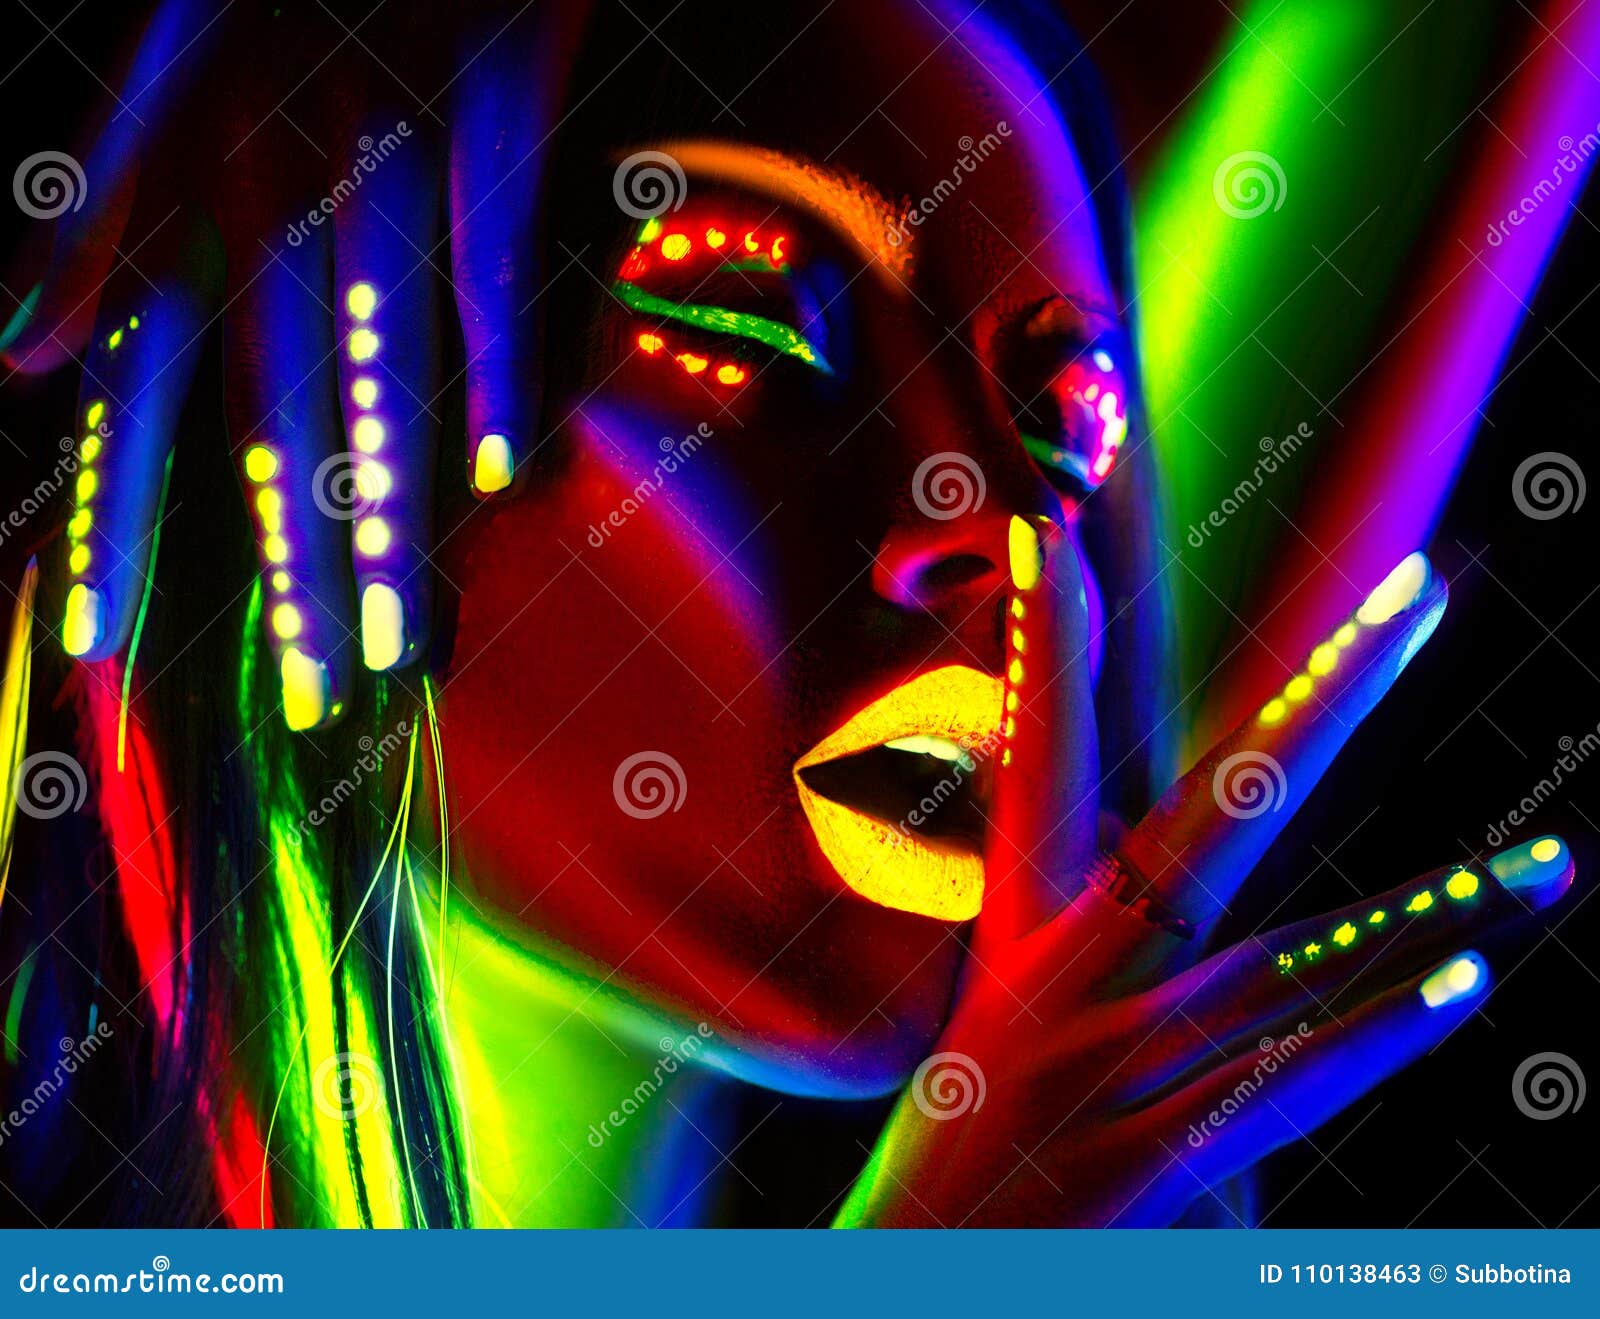 fashion model woman in neon light. beautiful model girl with colorful fluorescent makeup